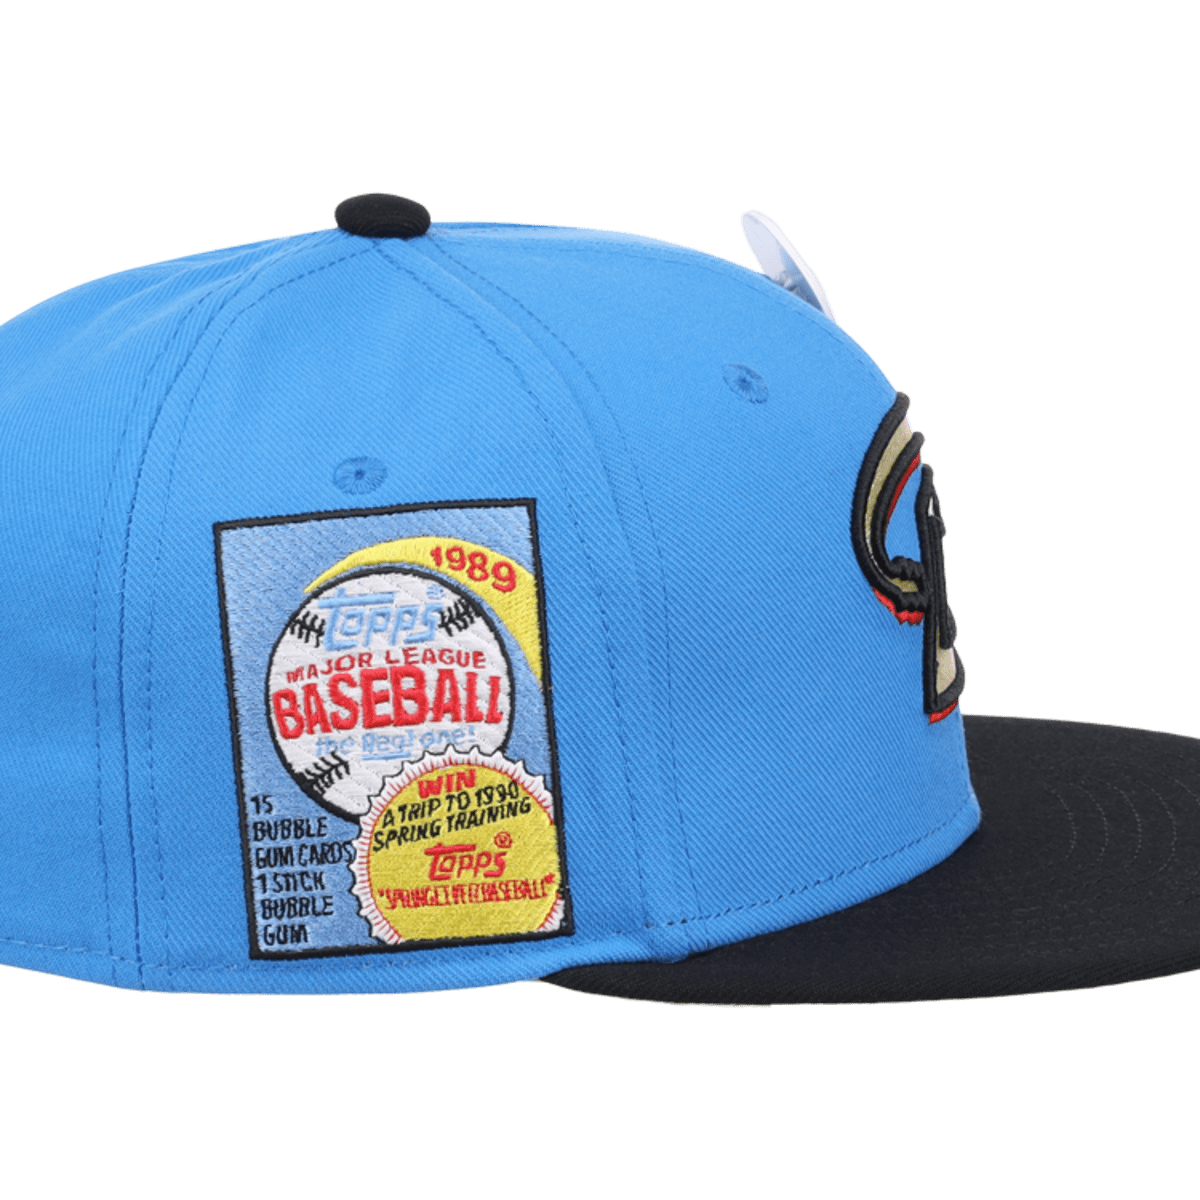 New Lids, Mitchell - Ness cards hat collection Topps & Digest Sports Collectors to pays tribute Baseball